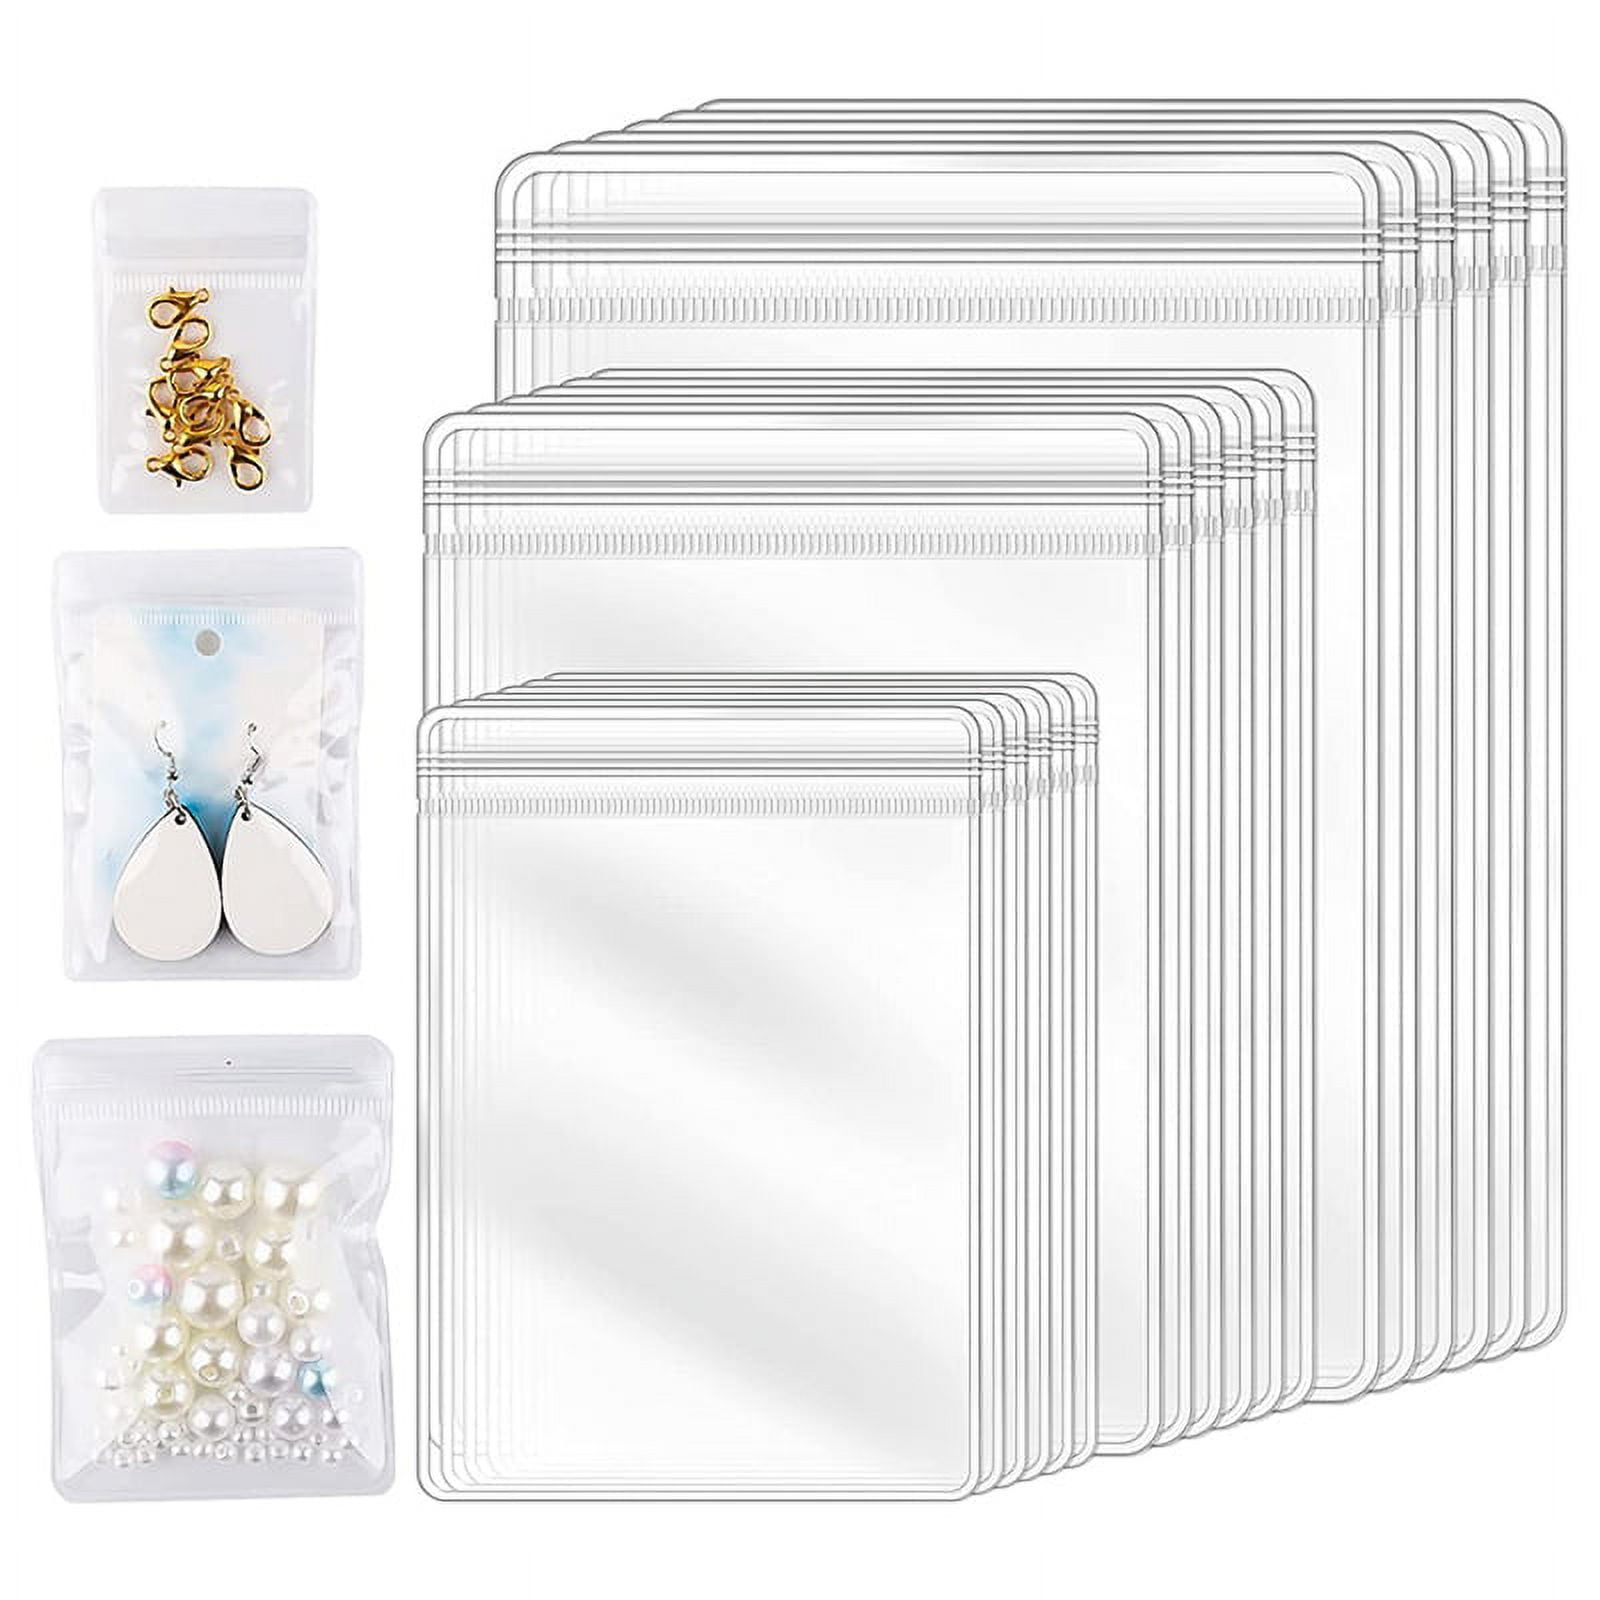 Minoly 1 x 2 Small Plastic Bags for Jewelry, 2 Mil 100pcs Clear  Reclosable Bags, Mini Zipper Baggies for Craft Beads, Seeds, Coins, Tiny  Parts, Pills, Screws etc 